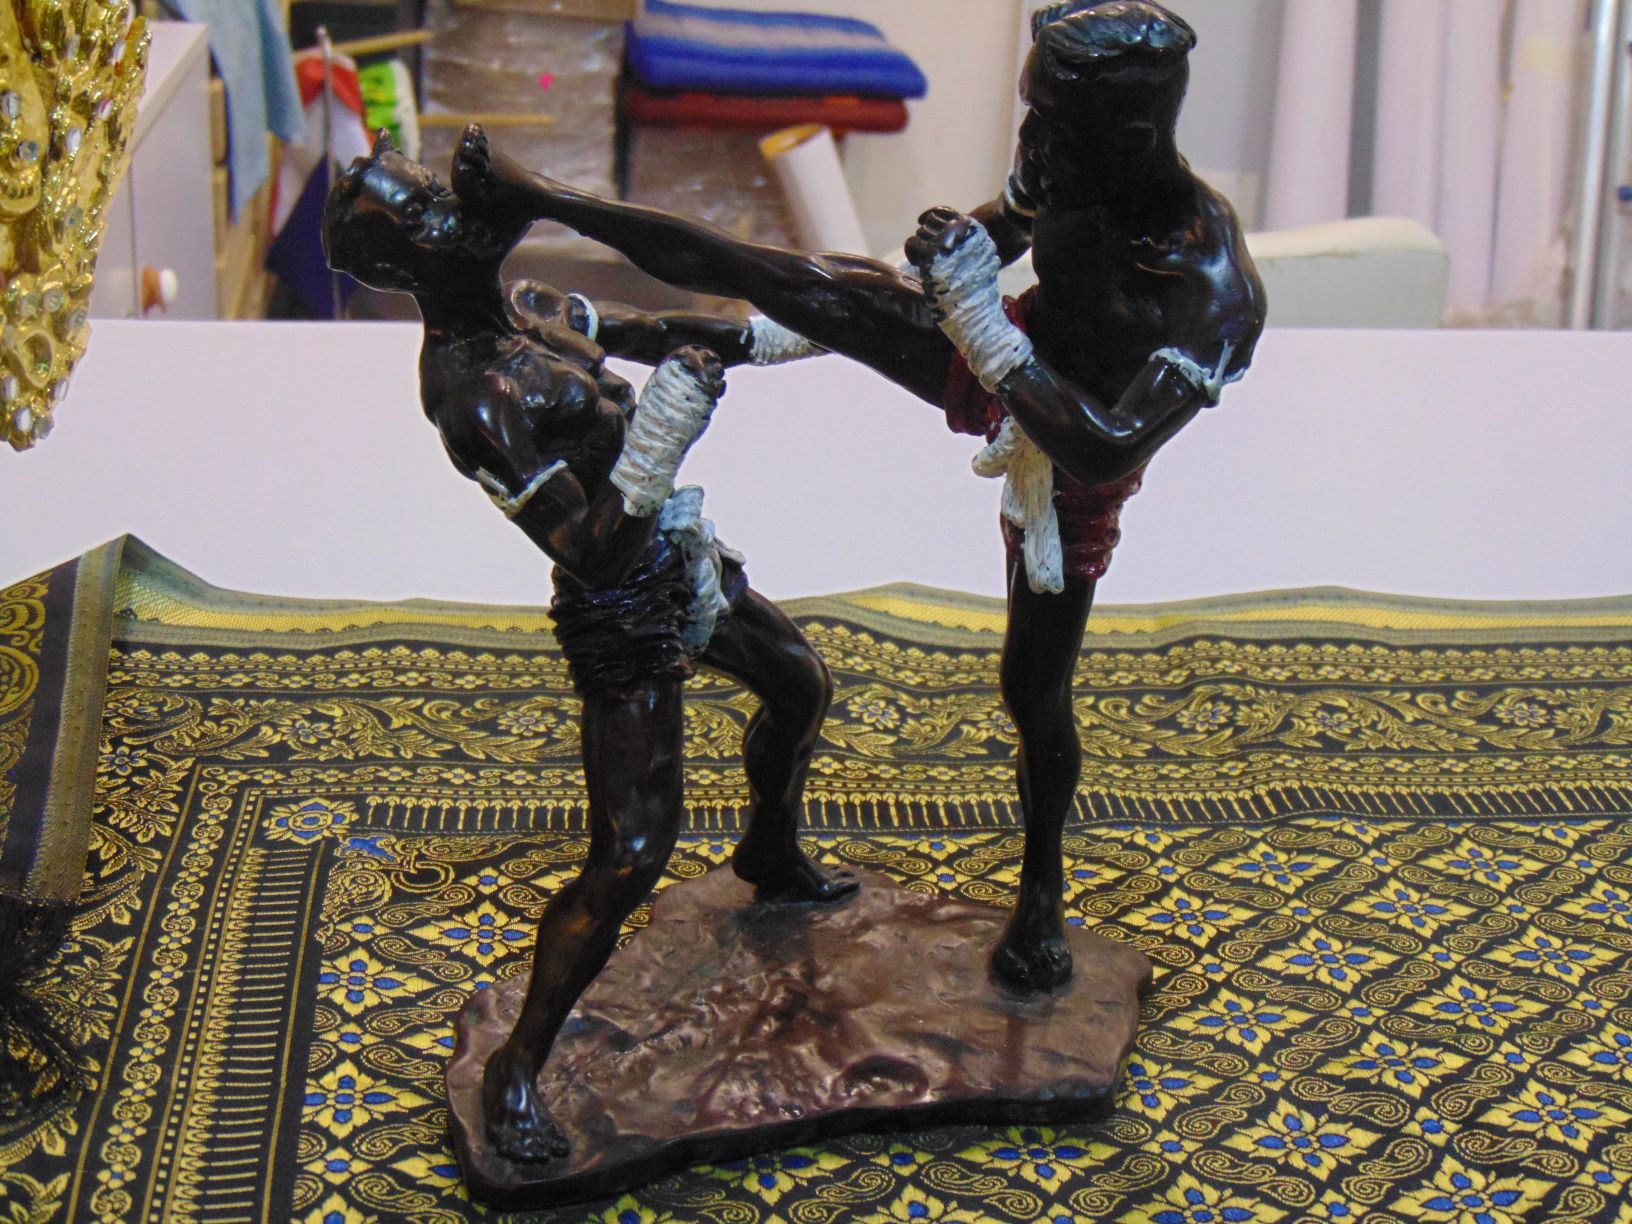 " In the gut"
Artwork of a man performing a crane kick on his opponent
Not literally, this phrase expresses the pain affiliated with a crane kick.